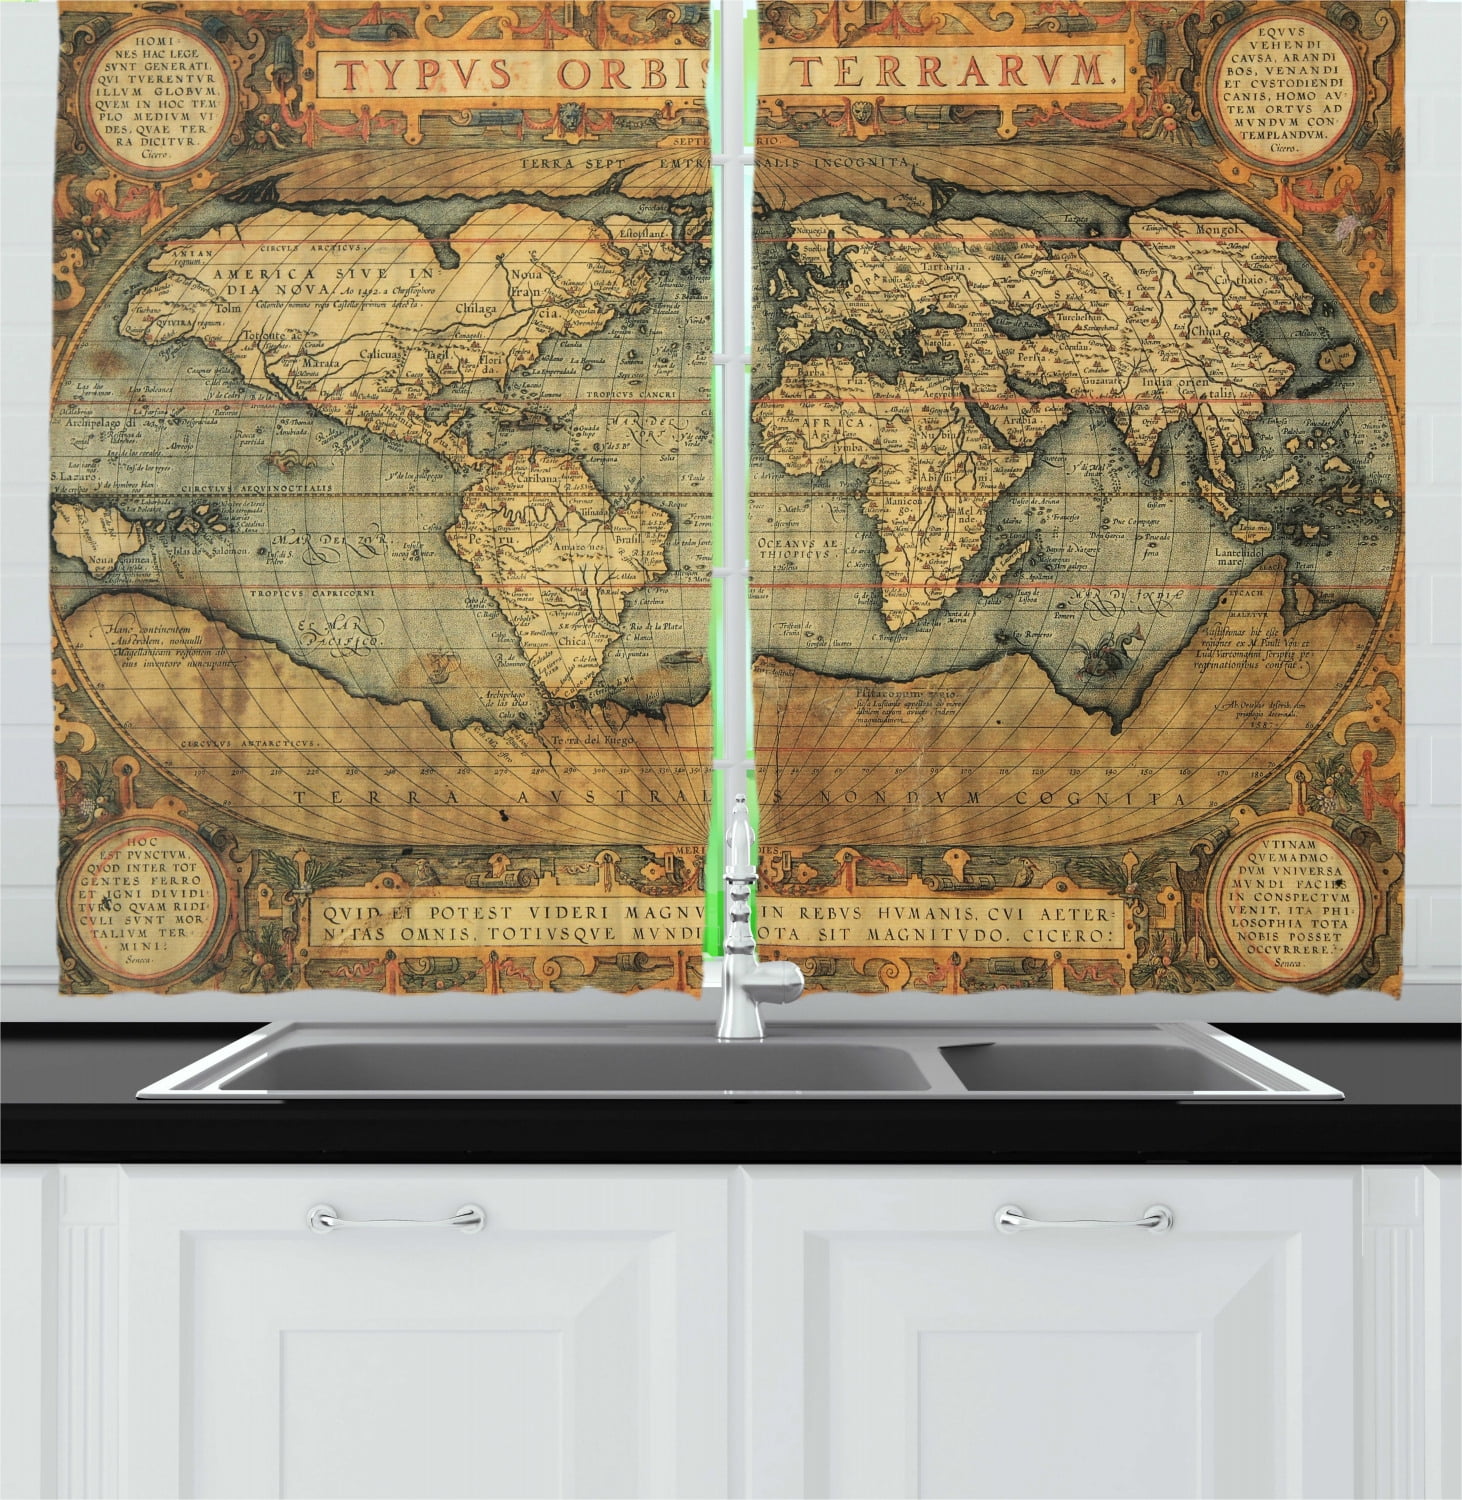 Old Atlas Maps Lampshades Ideal To Match Vintage Atlas Maps Cushions & Curtains 